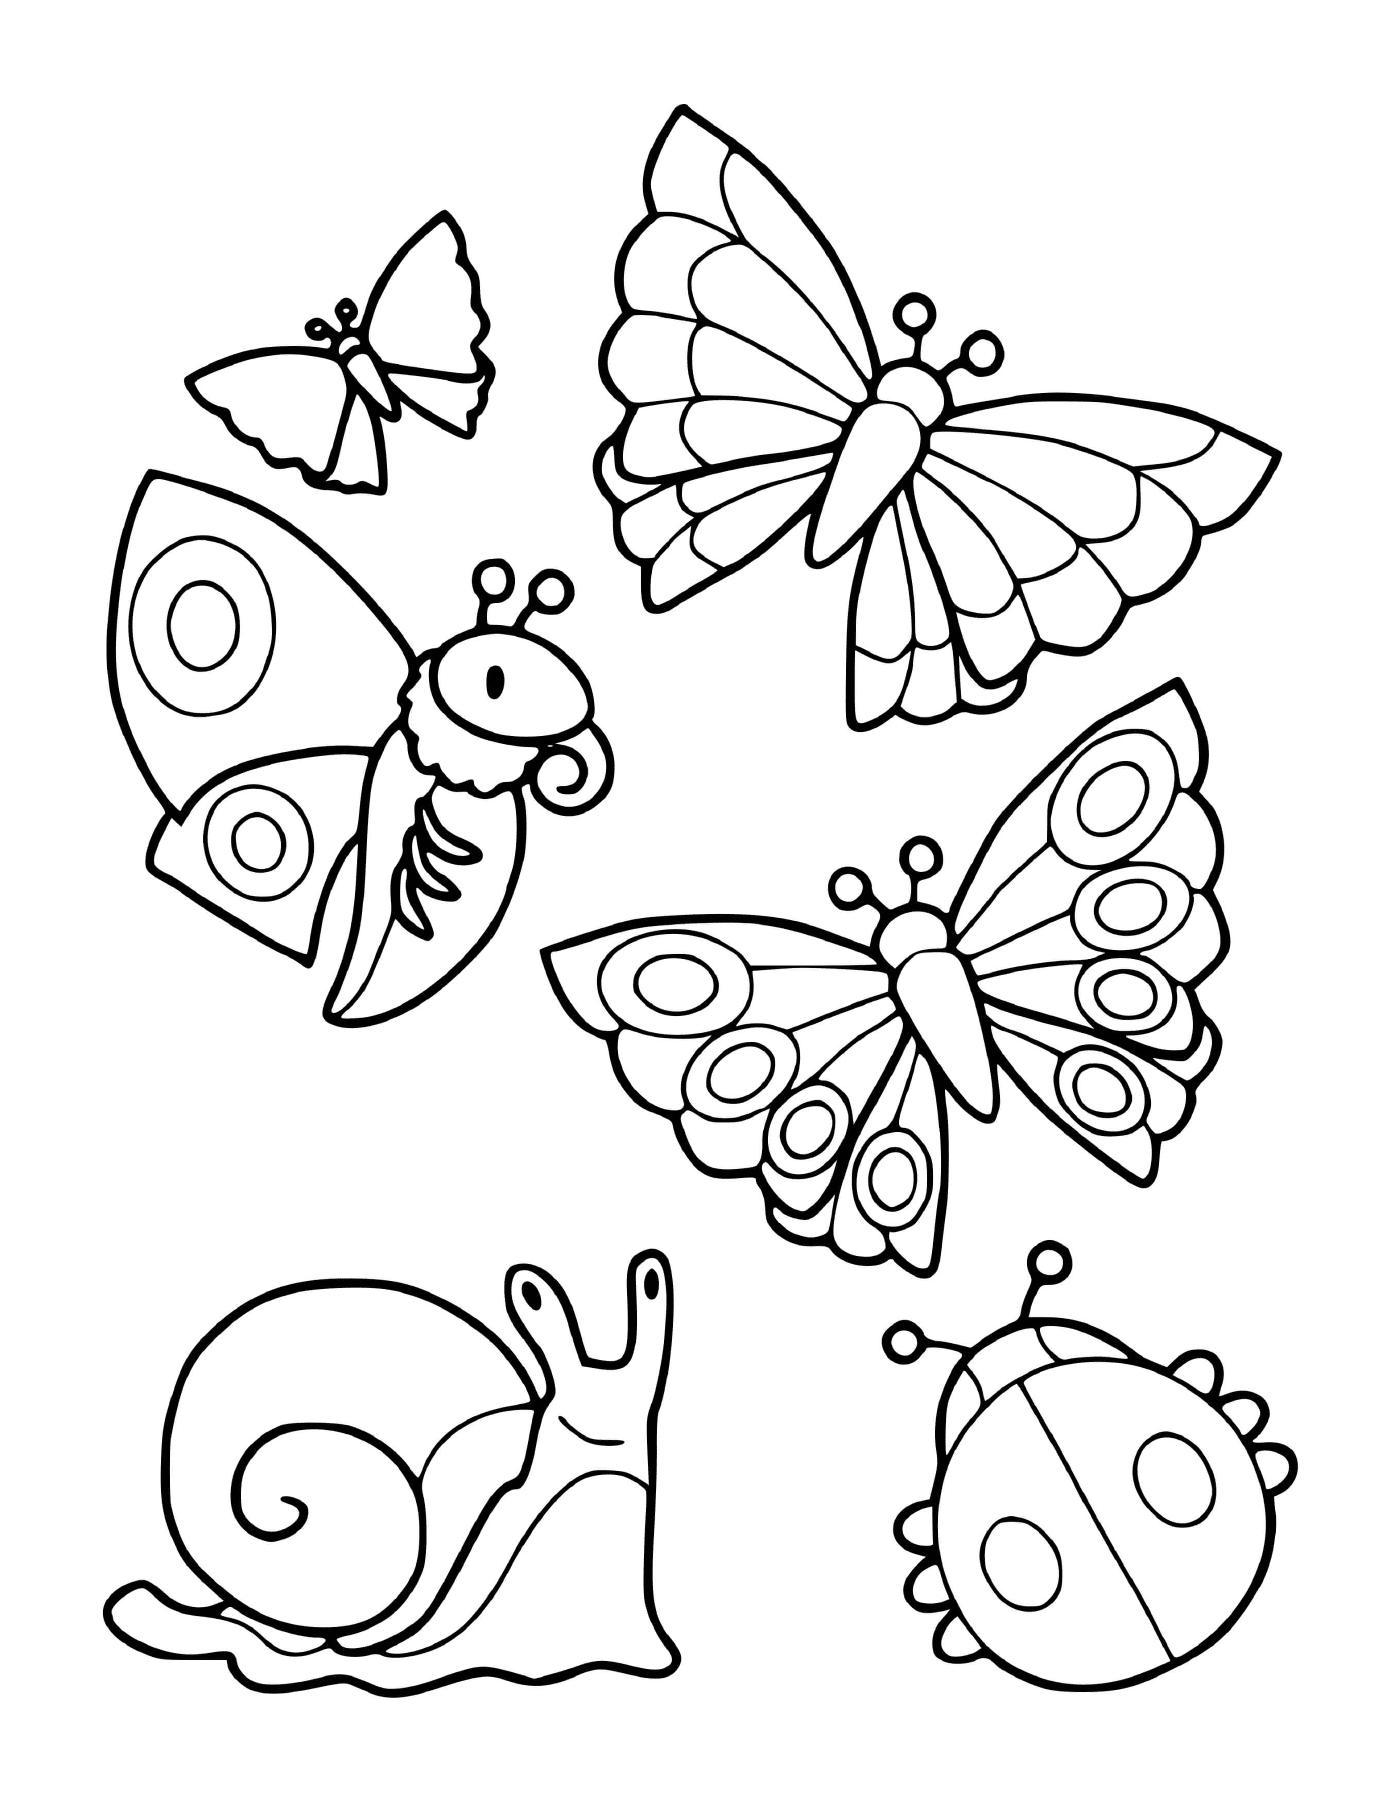  A collection of insects including butterflies and a snail 